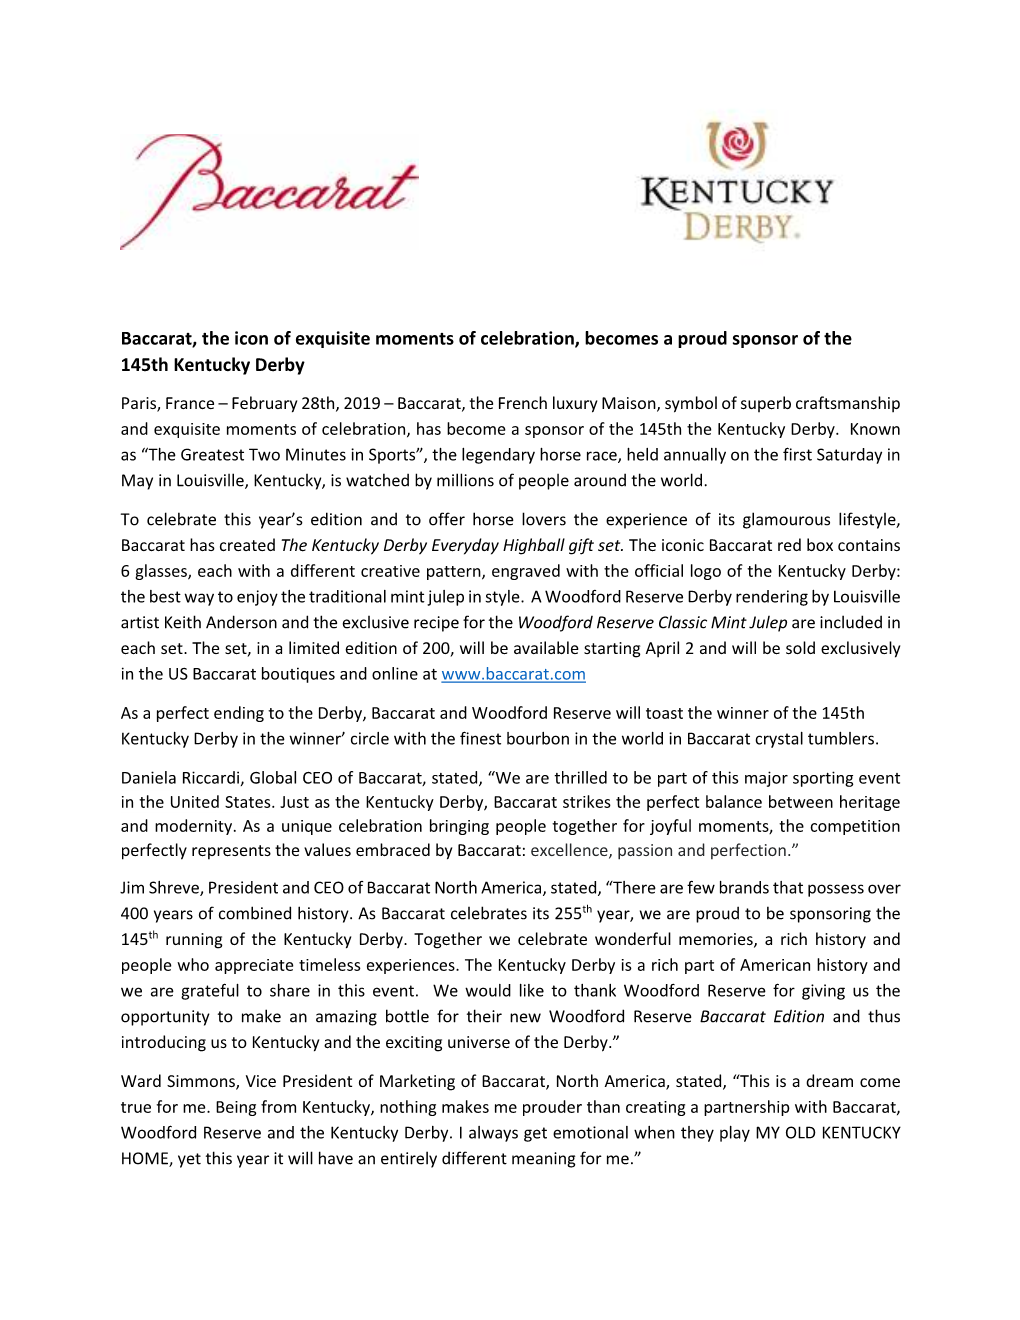 Baccarat, the Icon of Exquisite Moments of Celebration, Becomes a Proud Sponsor of the 145Th Kentucky Derby